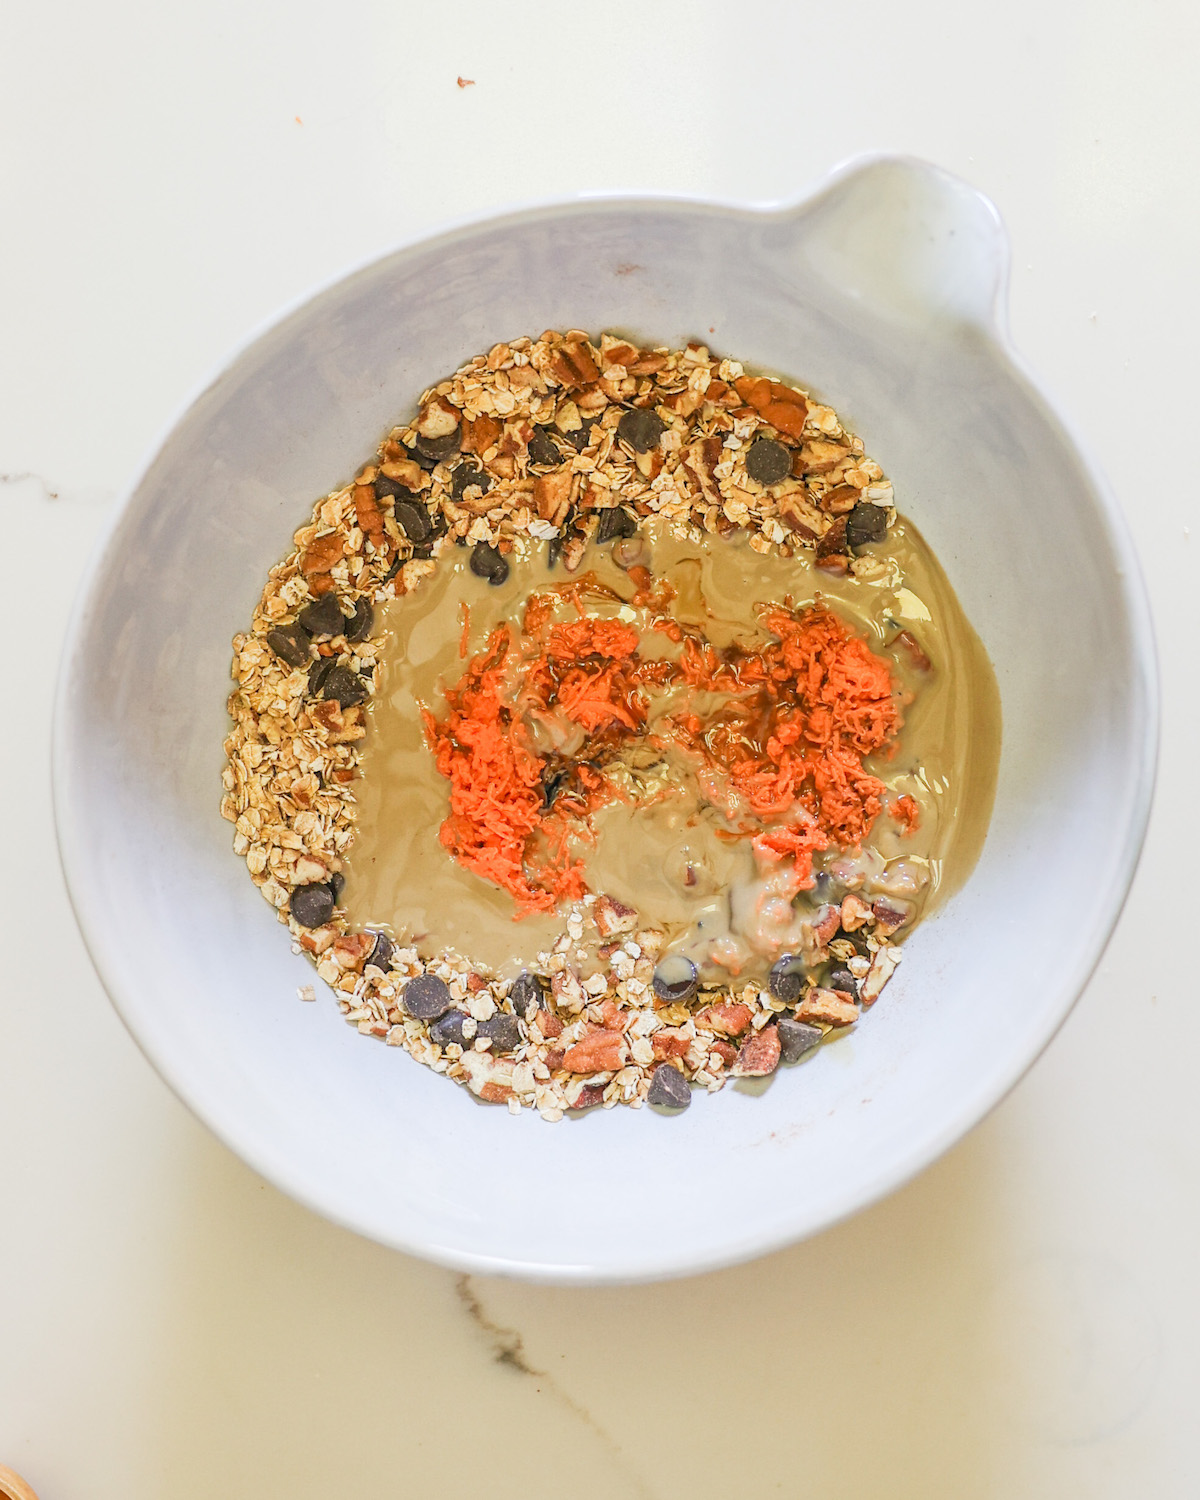 A mixing bowl of the oats, pecans, chocolate chips, tahini, and shredded sweet potatoes.